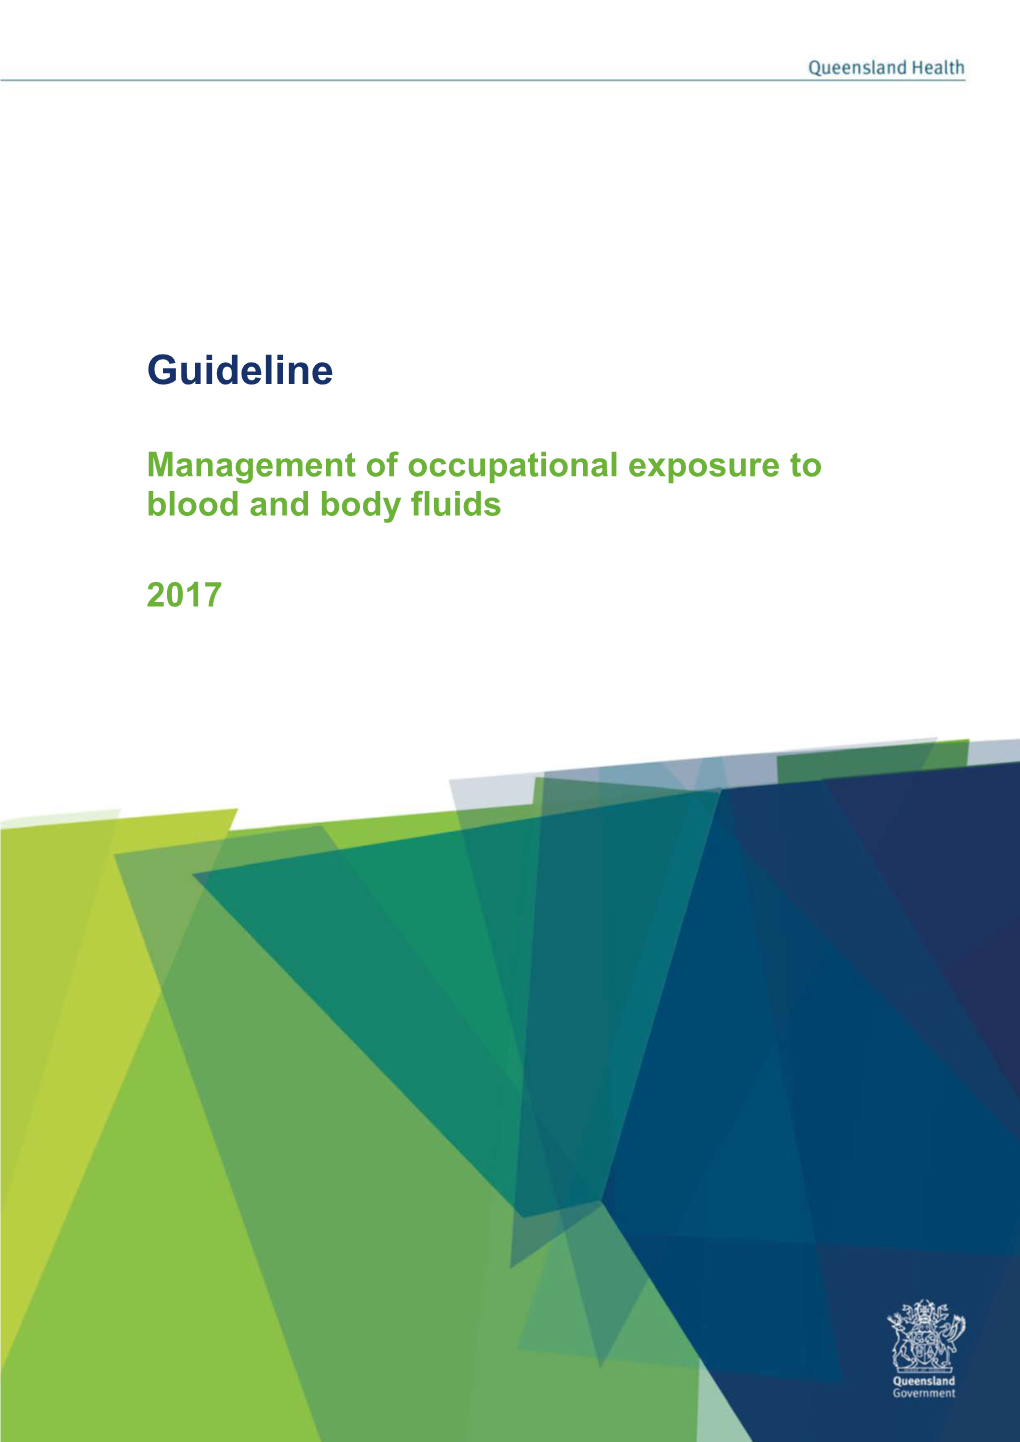 Guideline for Management of Exposures to Blood and Body Fluids